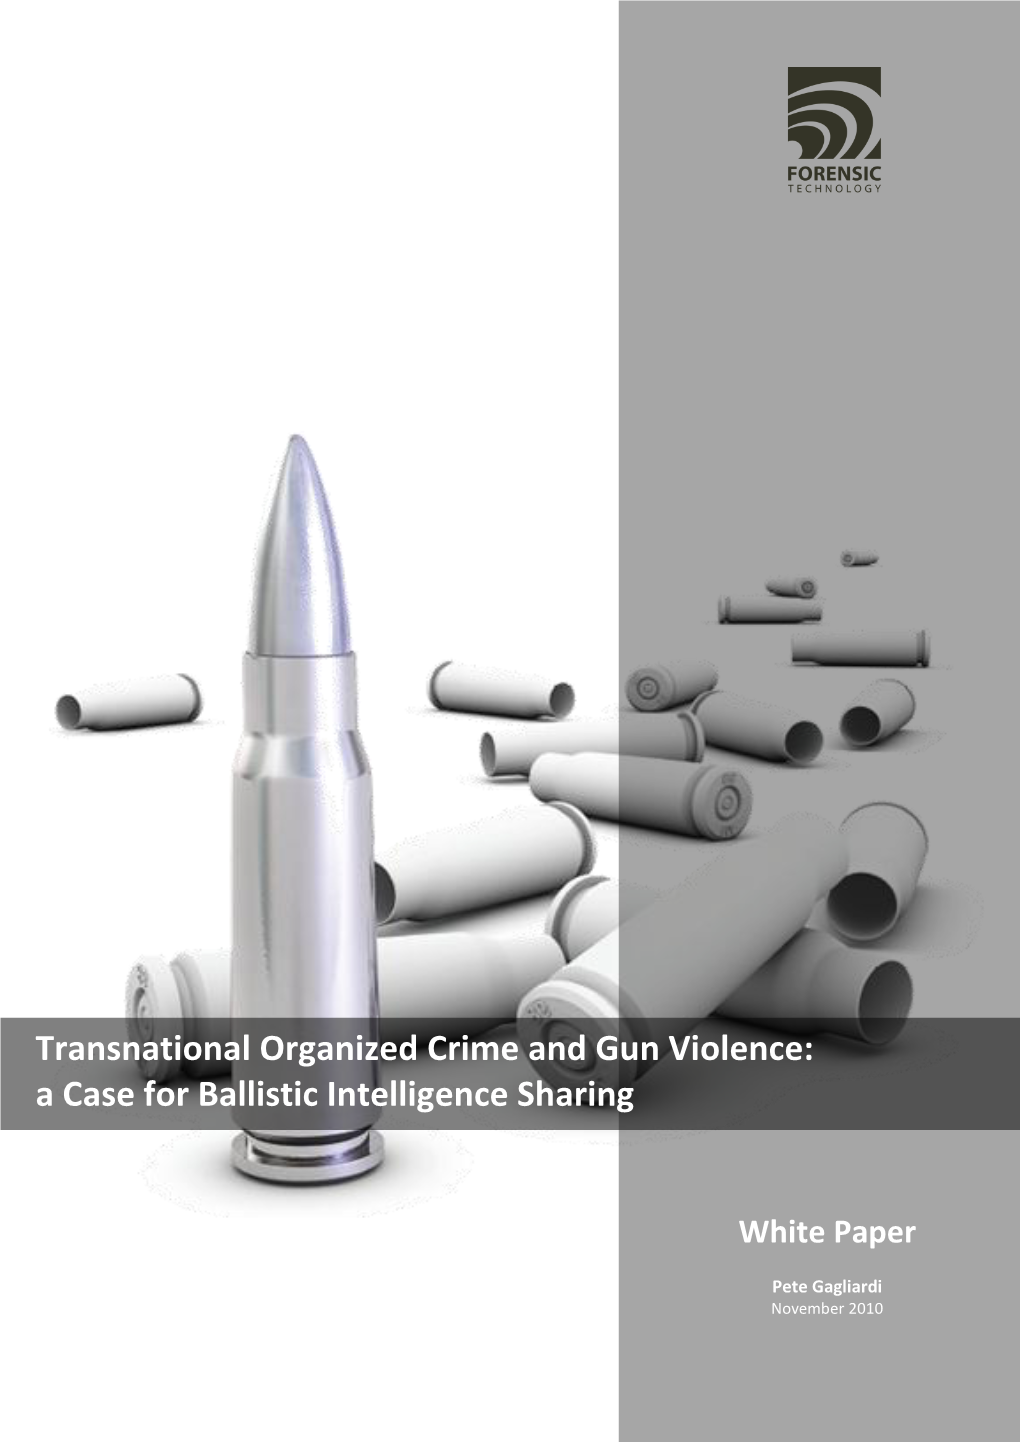 Transnational Organized Crime and Gun Violence: a Case for Ballistic Intelligence Sharing